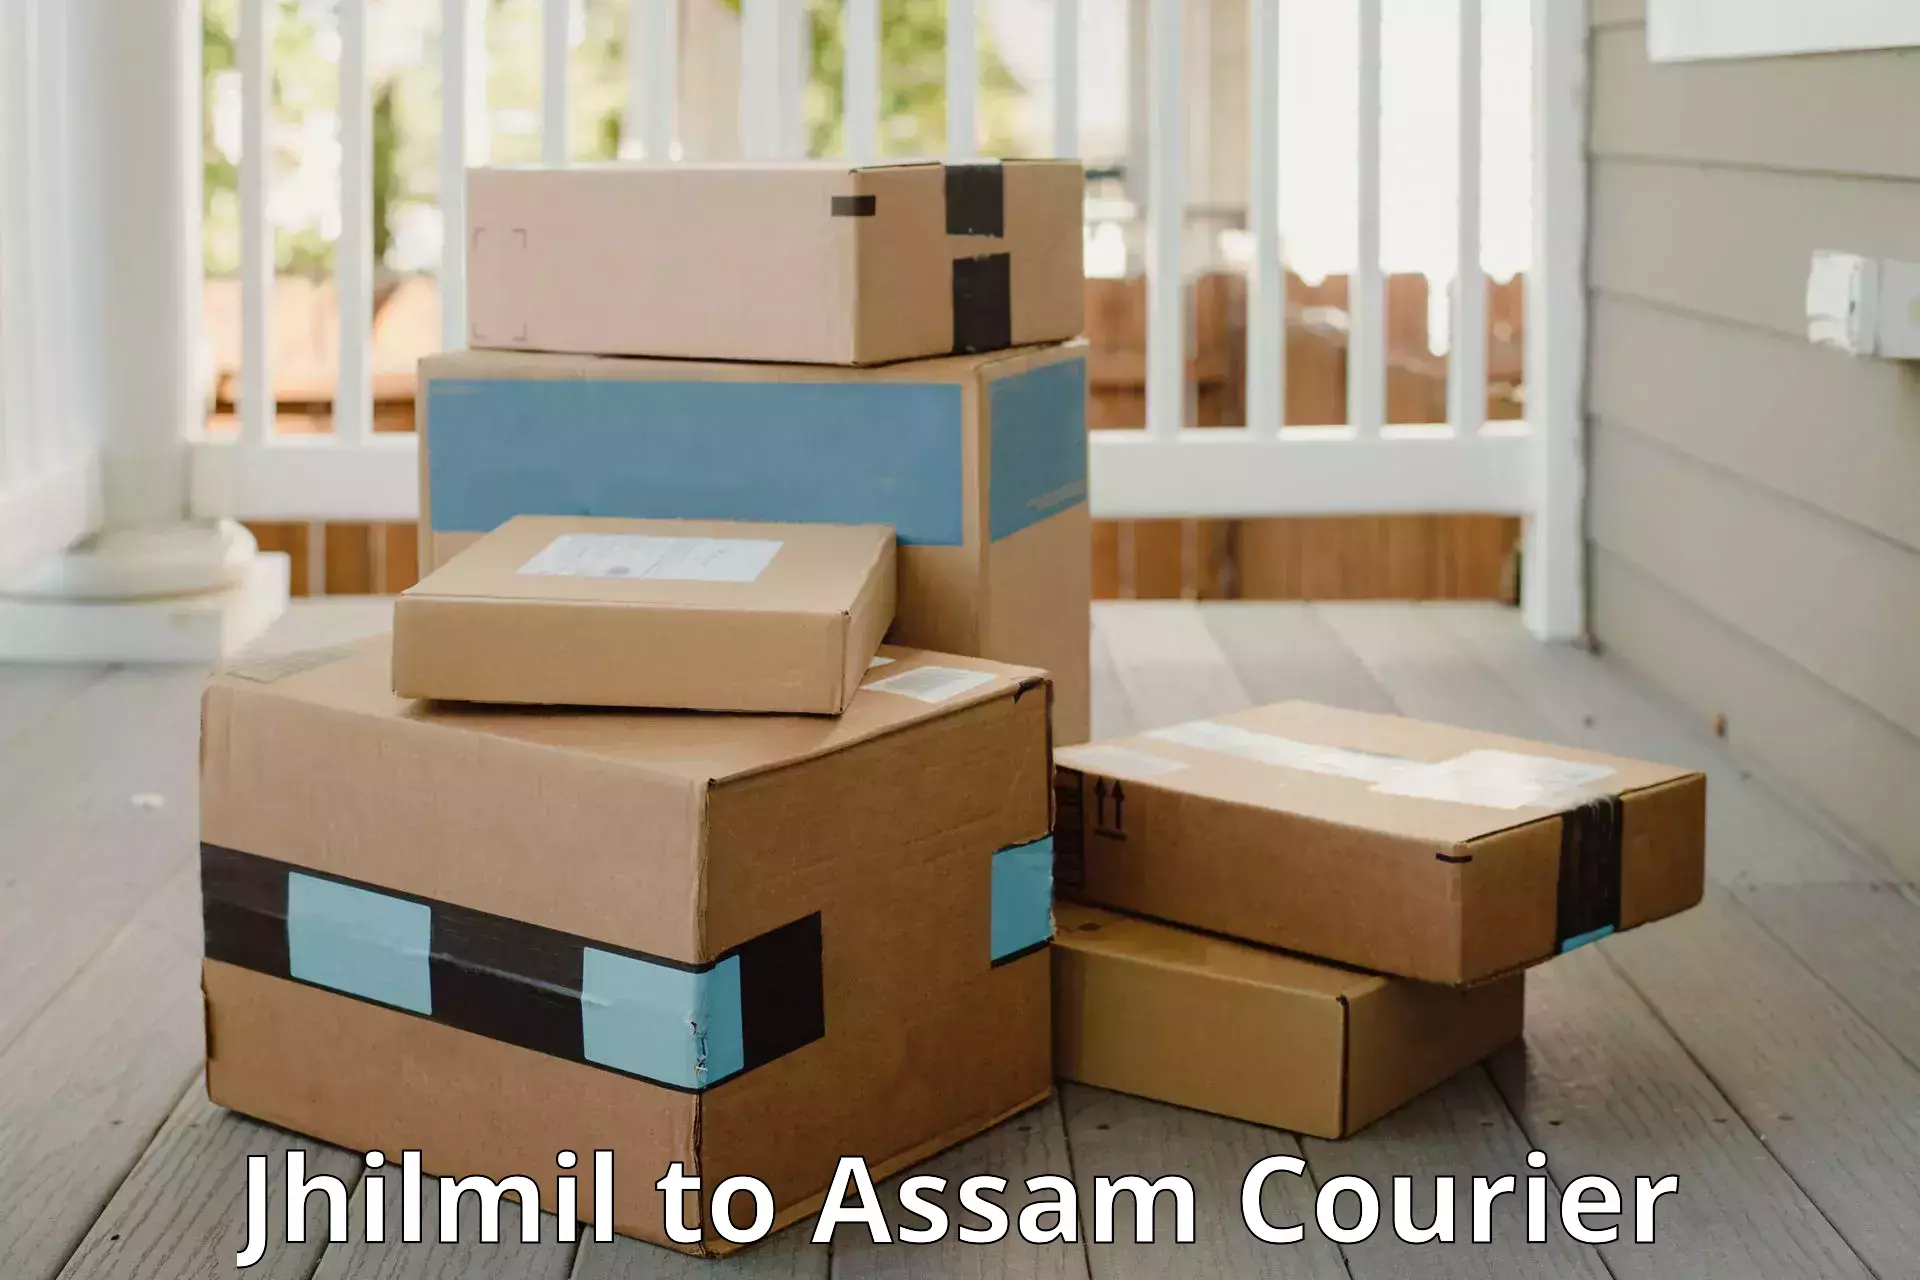 Luggage transport service Jhilmil to Demow